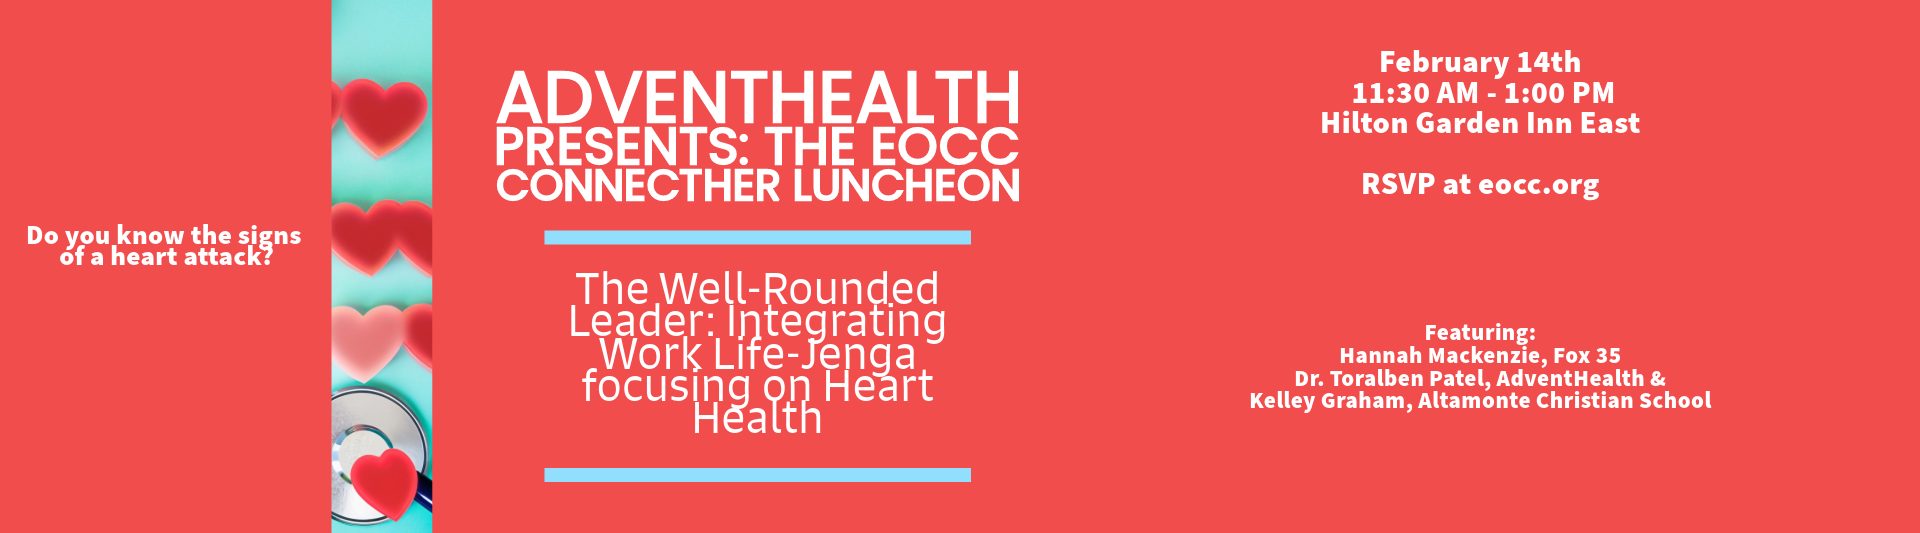 ConnectHER Luncheon - Heart